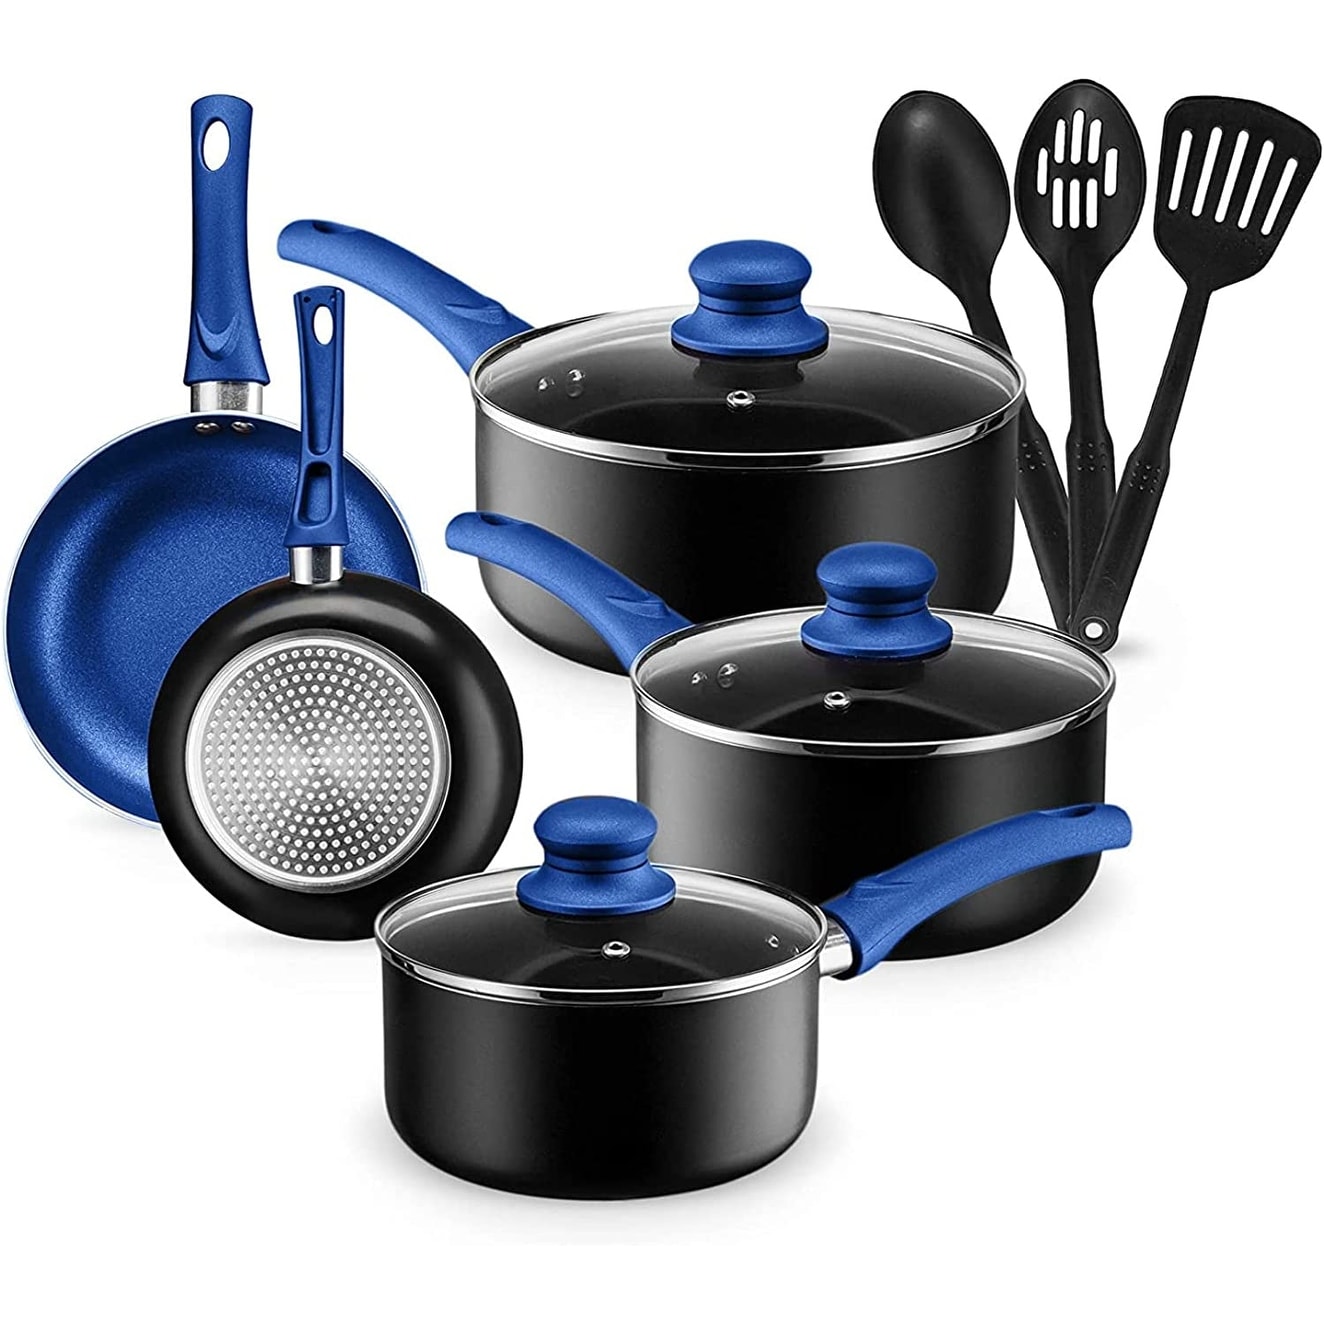 Kitchen Academy Induction Cookware Sets - 12 Piece India